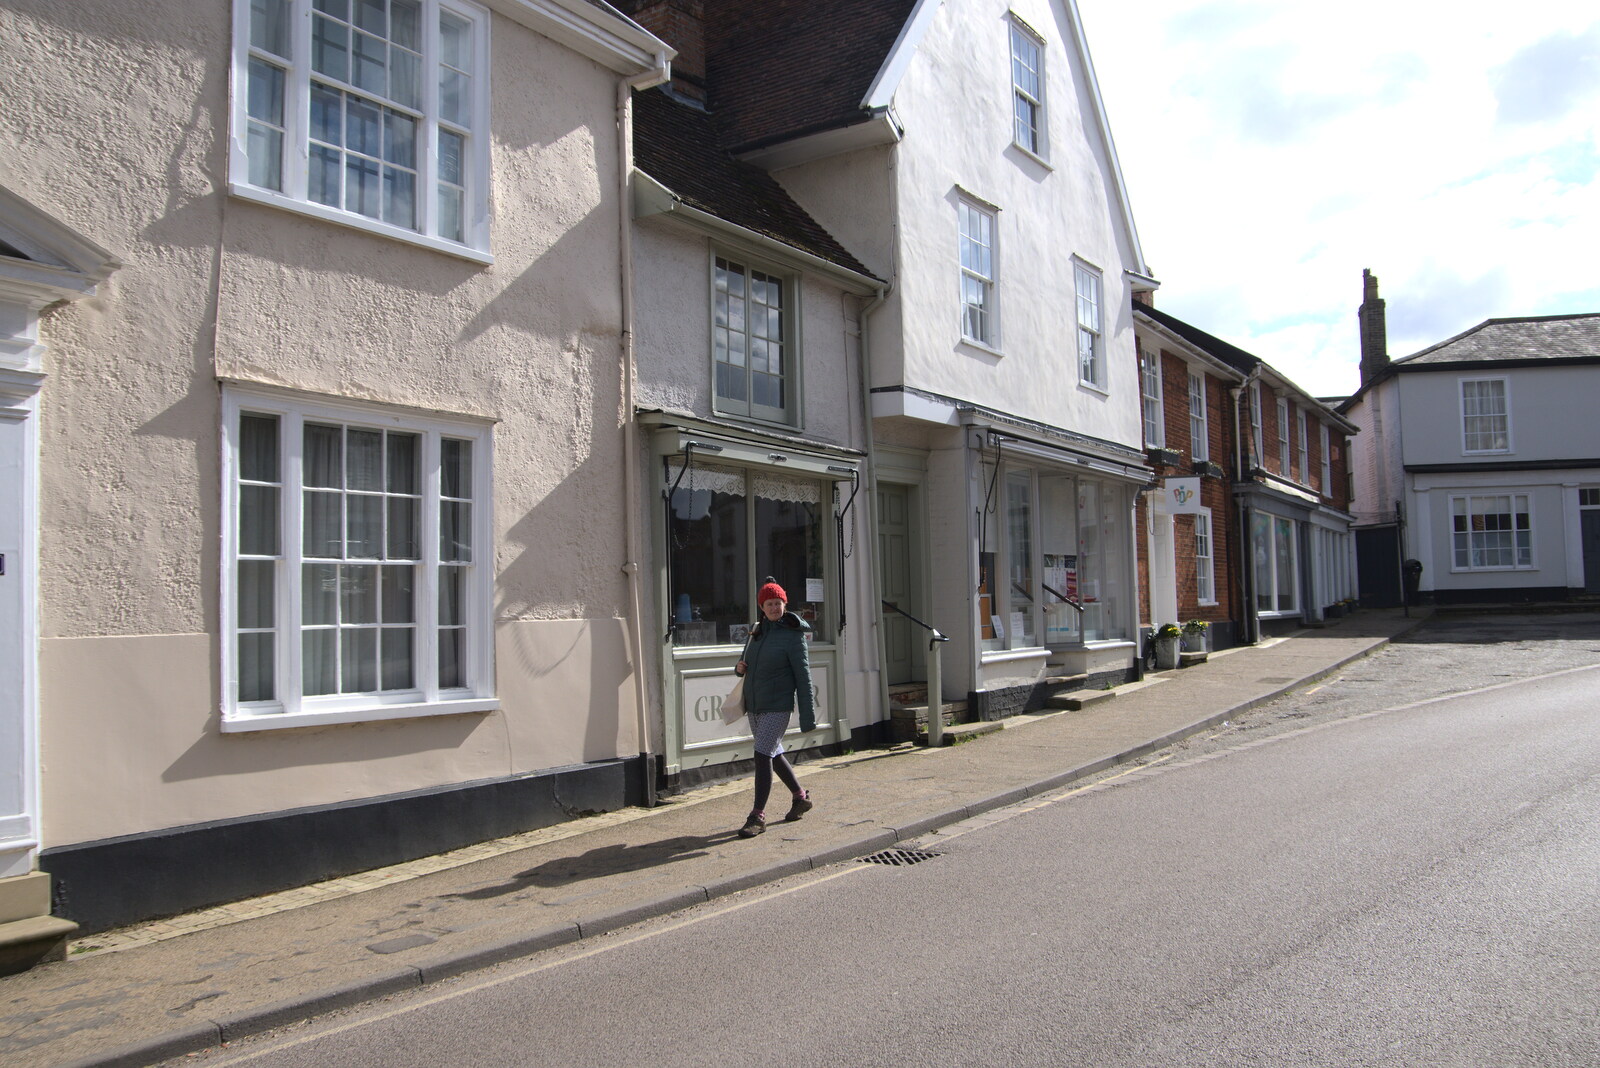 Isobel roams around Broad Street from Another Walk on Eye Airfield, Eye, Suffolk - 14th March 2021